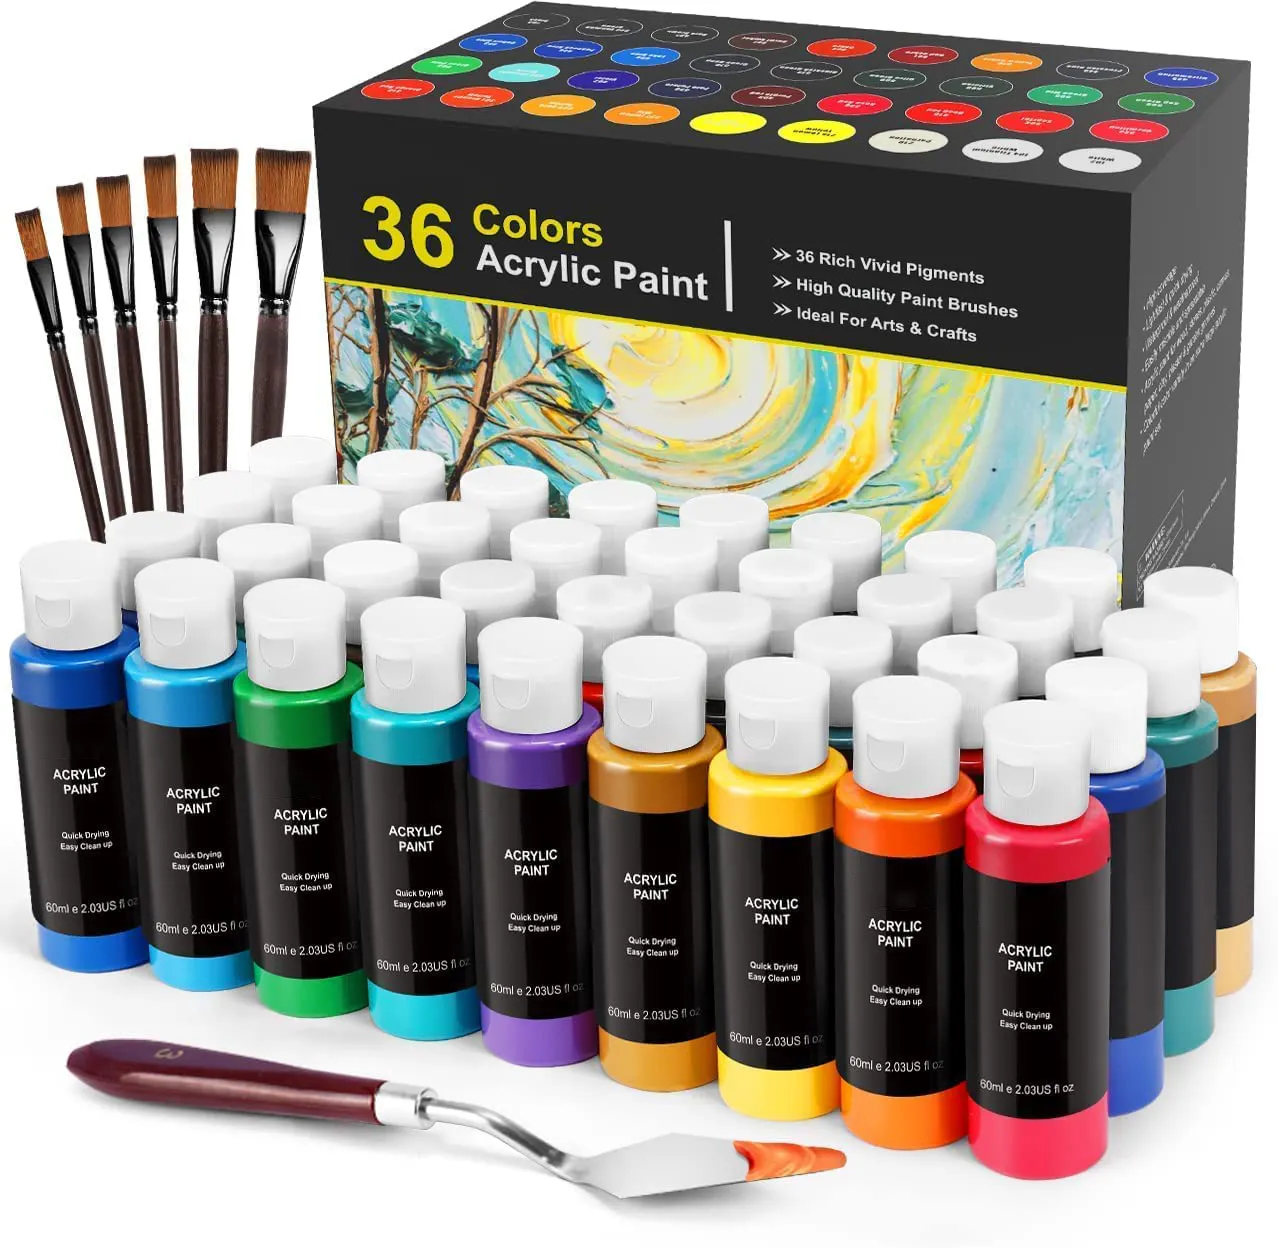 Acrylic Paint 36 Color Painting Supplies Set With 6 Art Brushes Palette Scraper Canvas Ceramic Wood And Stone Paint 500 - 1999 S